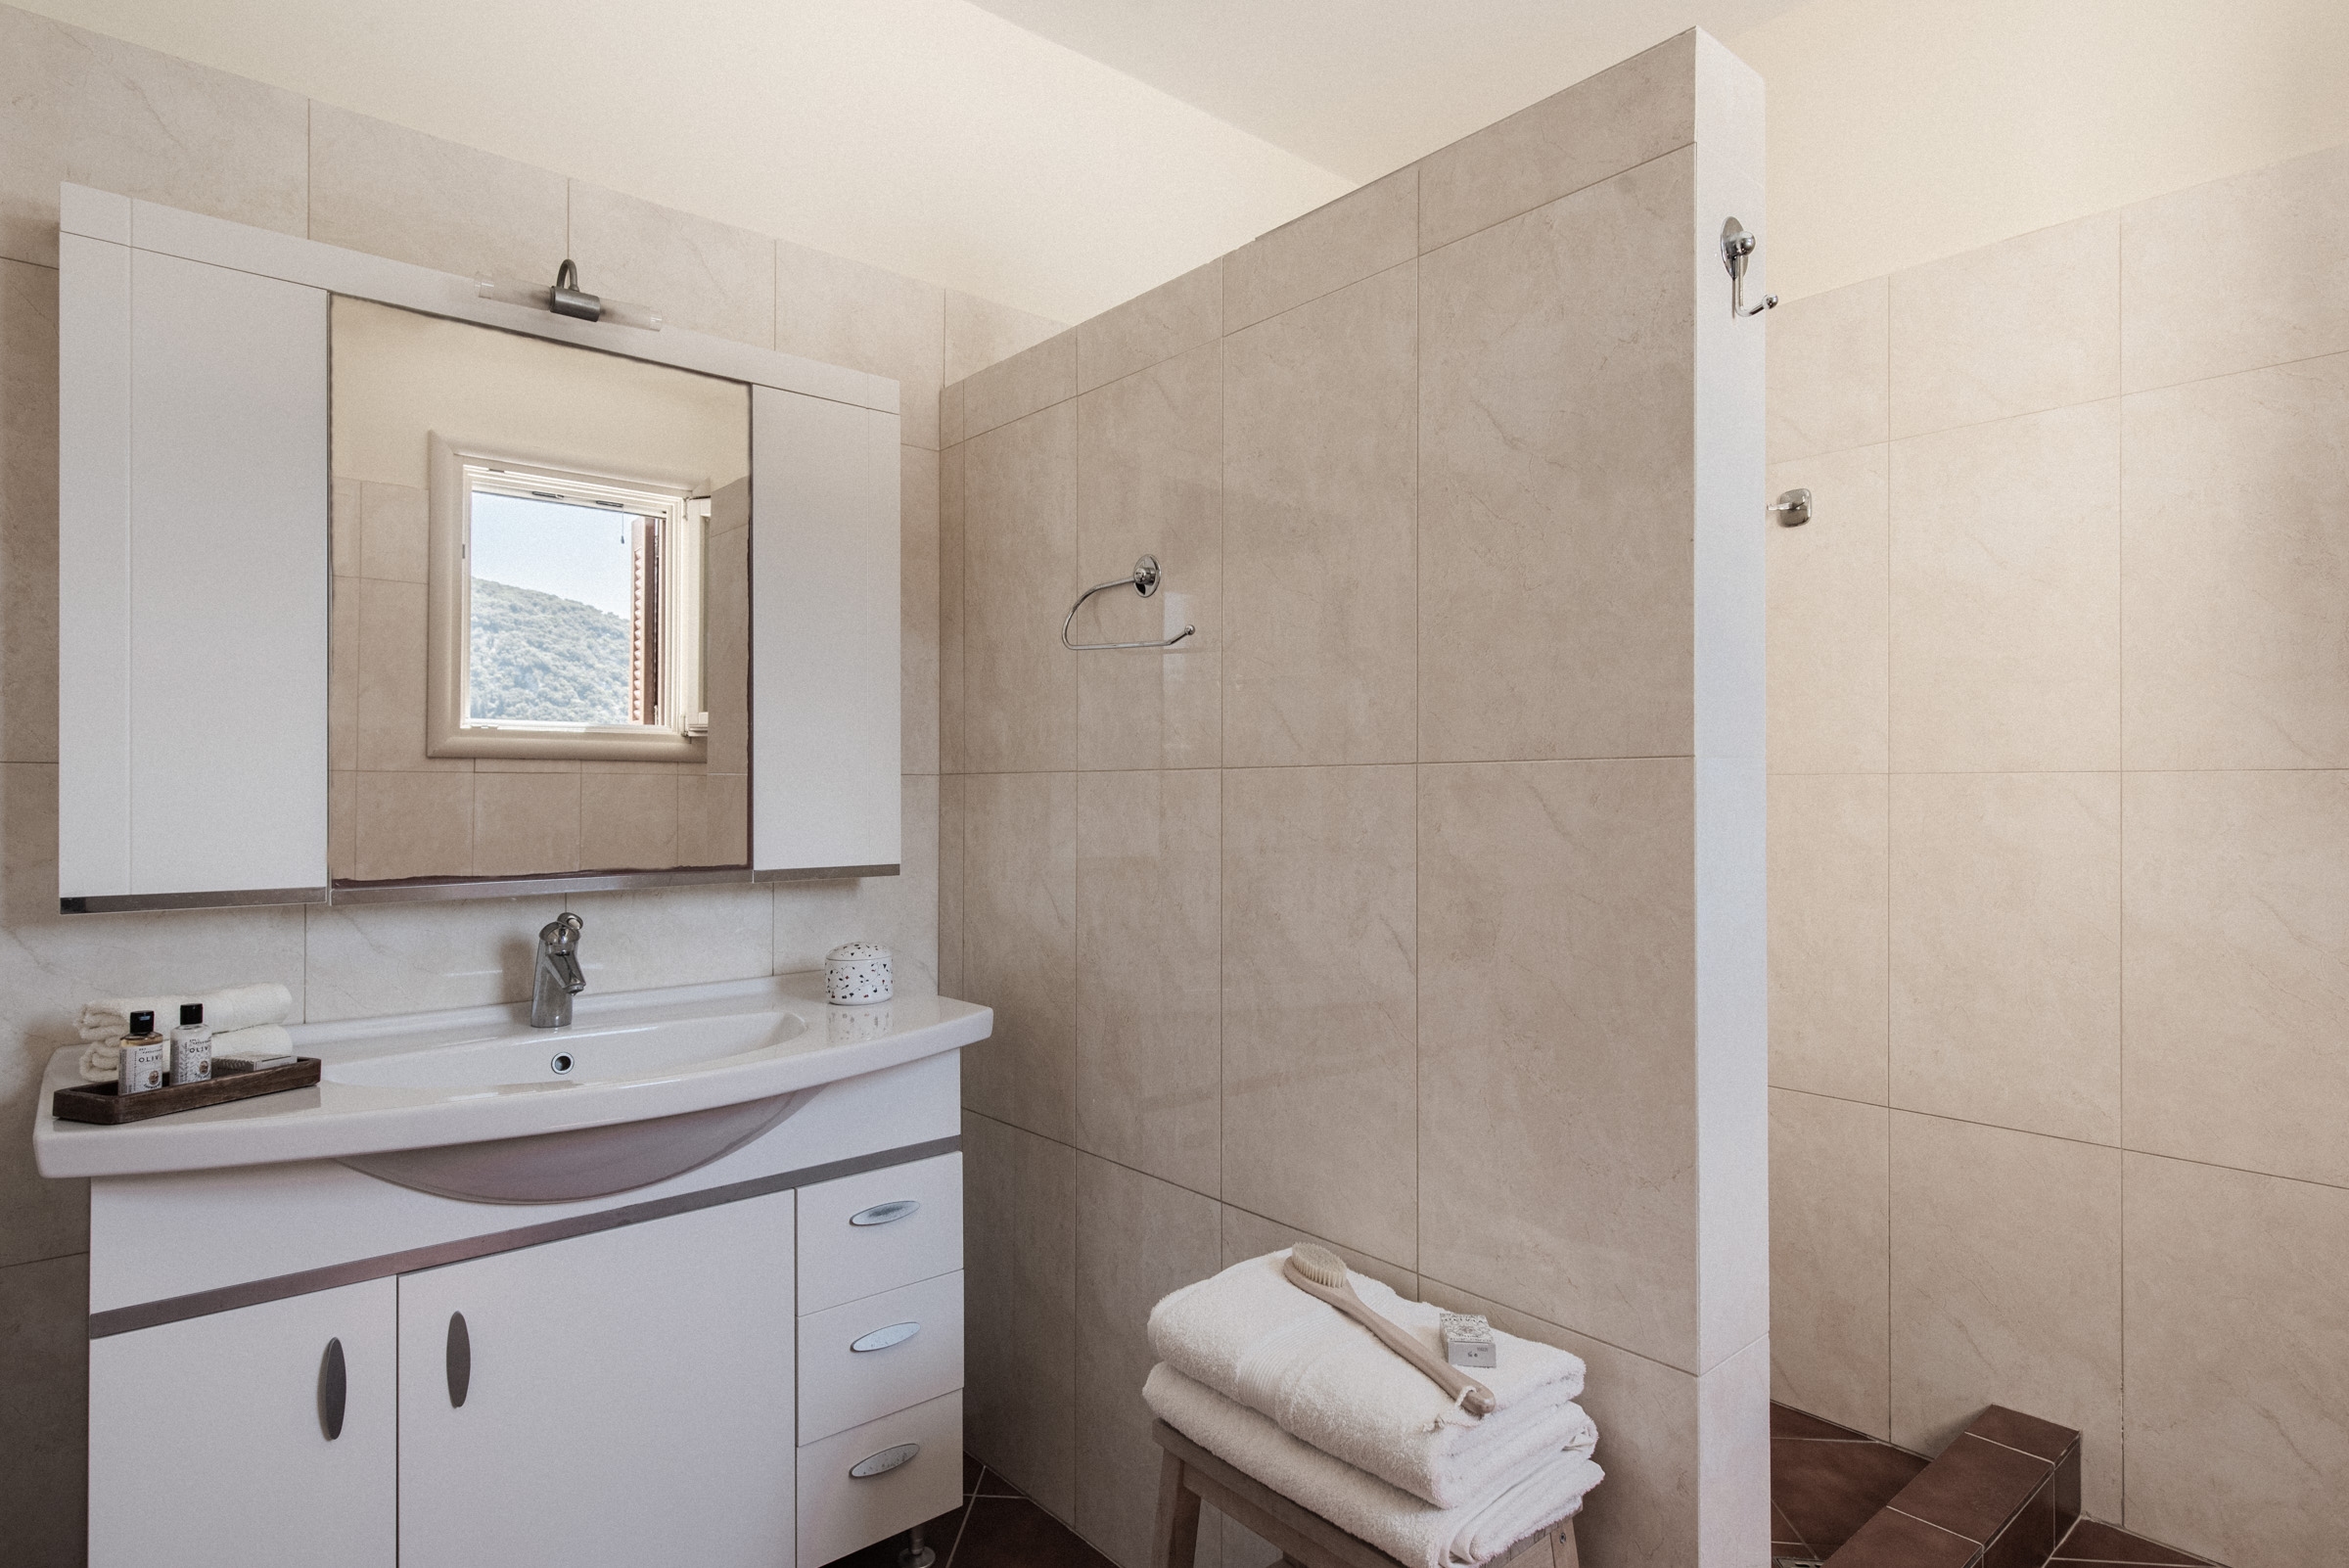 Bathroom of villa for rent on Ithaca Greece, Stavros